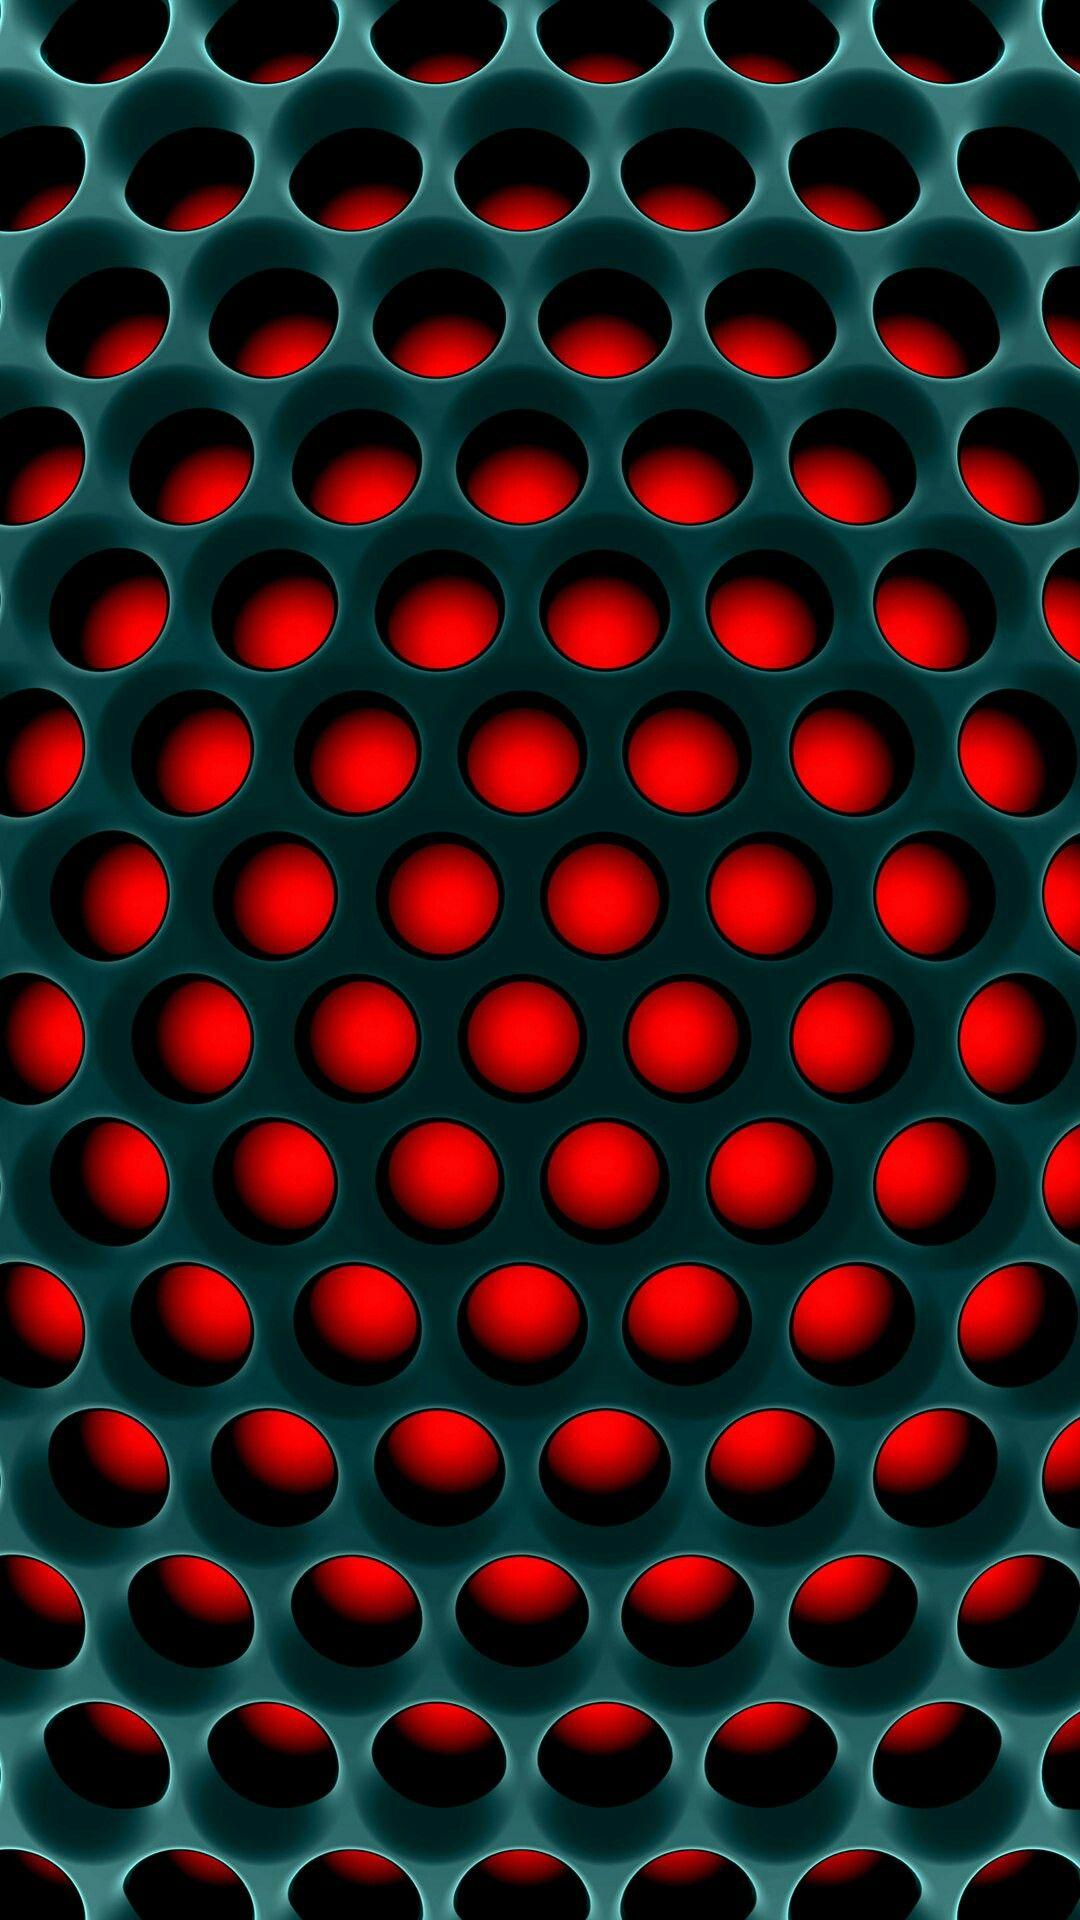 Red and Green Beehive Wallpaper. *Abstract and Geometric Wallpaper